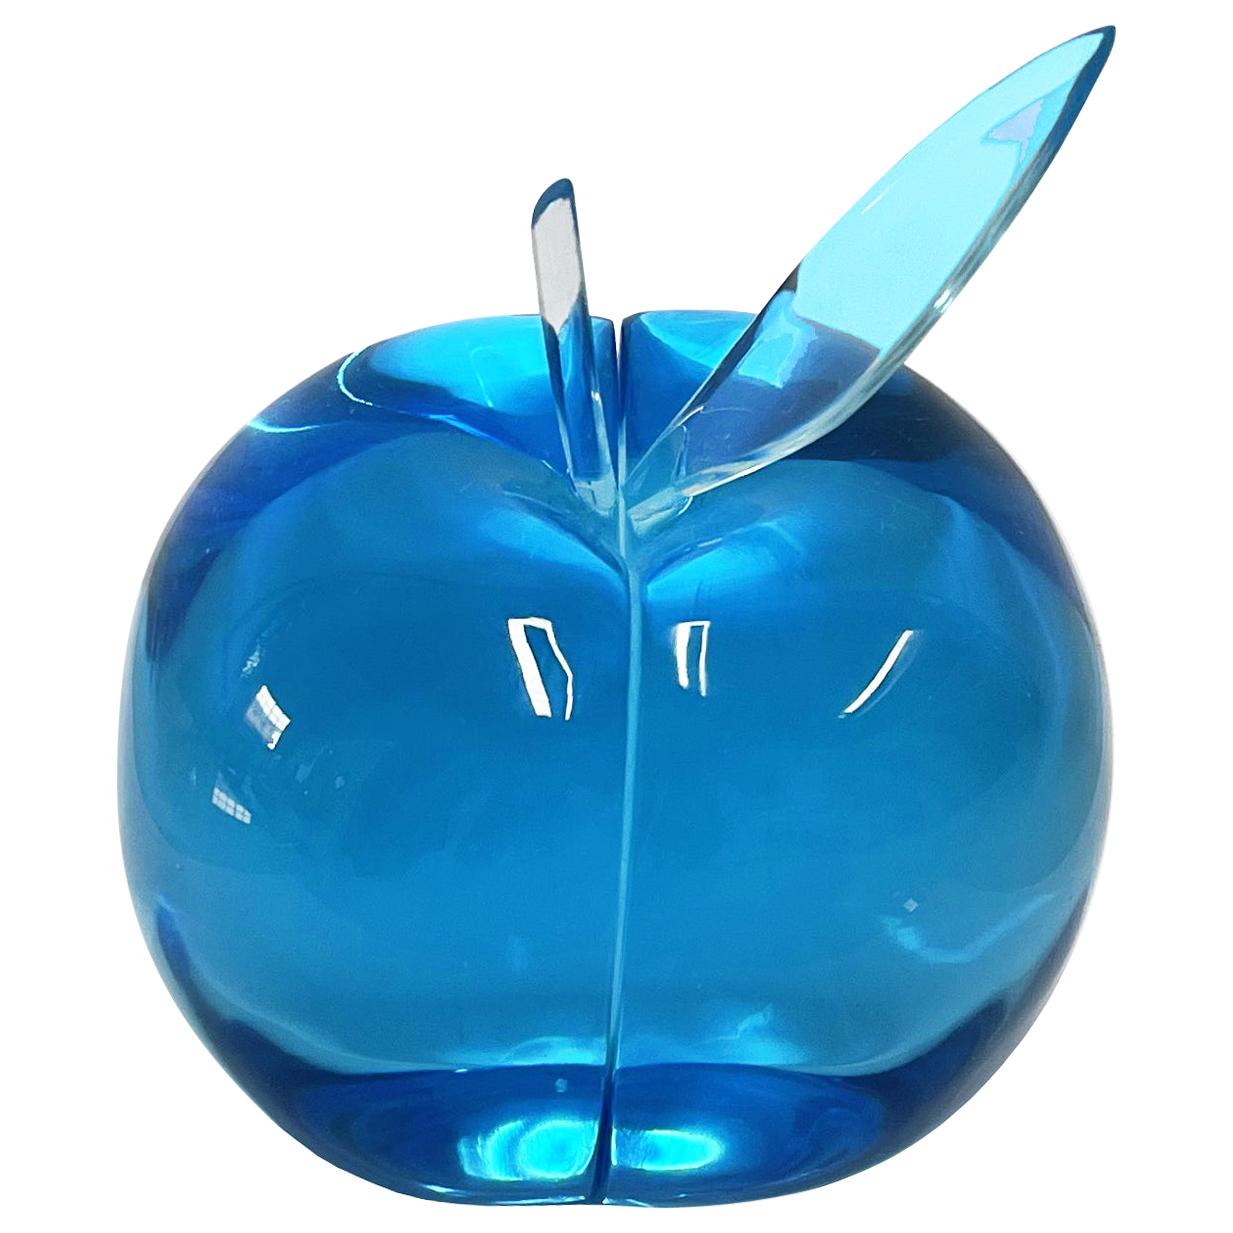 Contemporary 'Apple' Sculpture Blue Crystal Handcrafted in Italy by Ghirò Studio